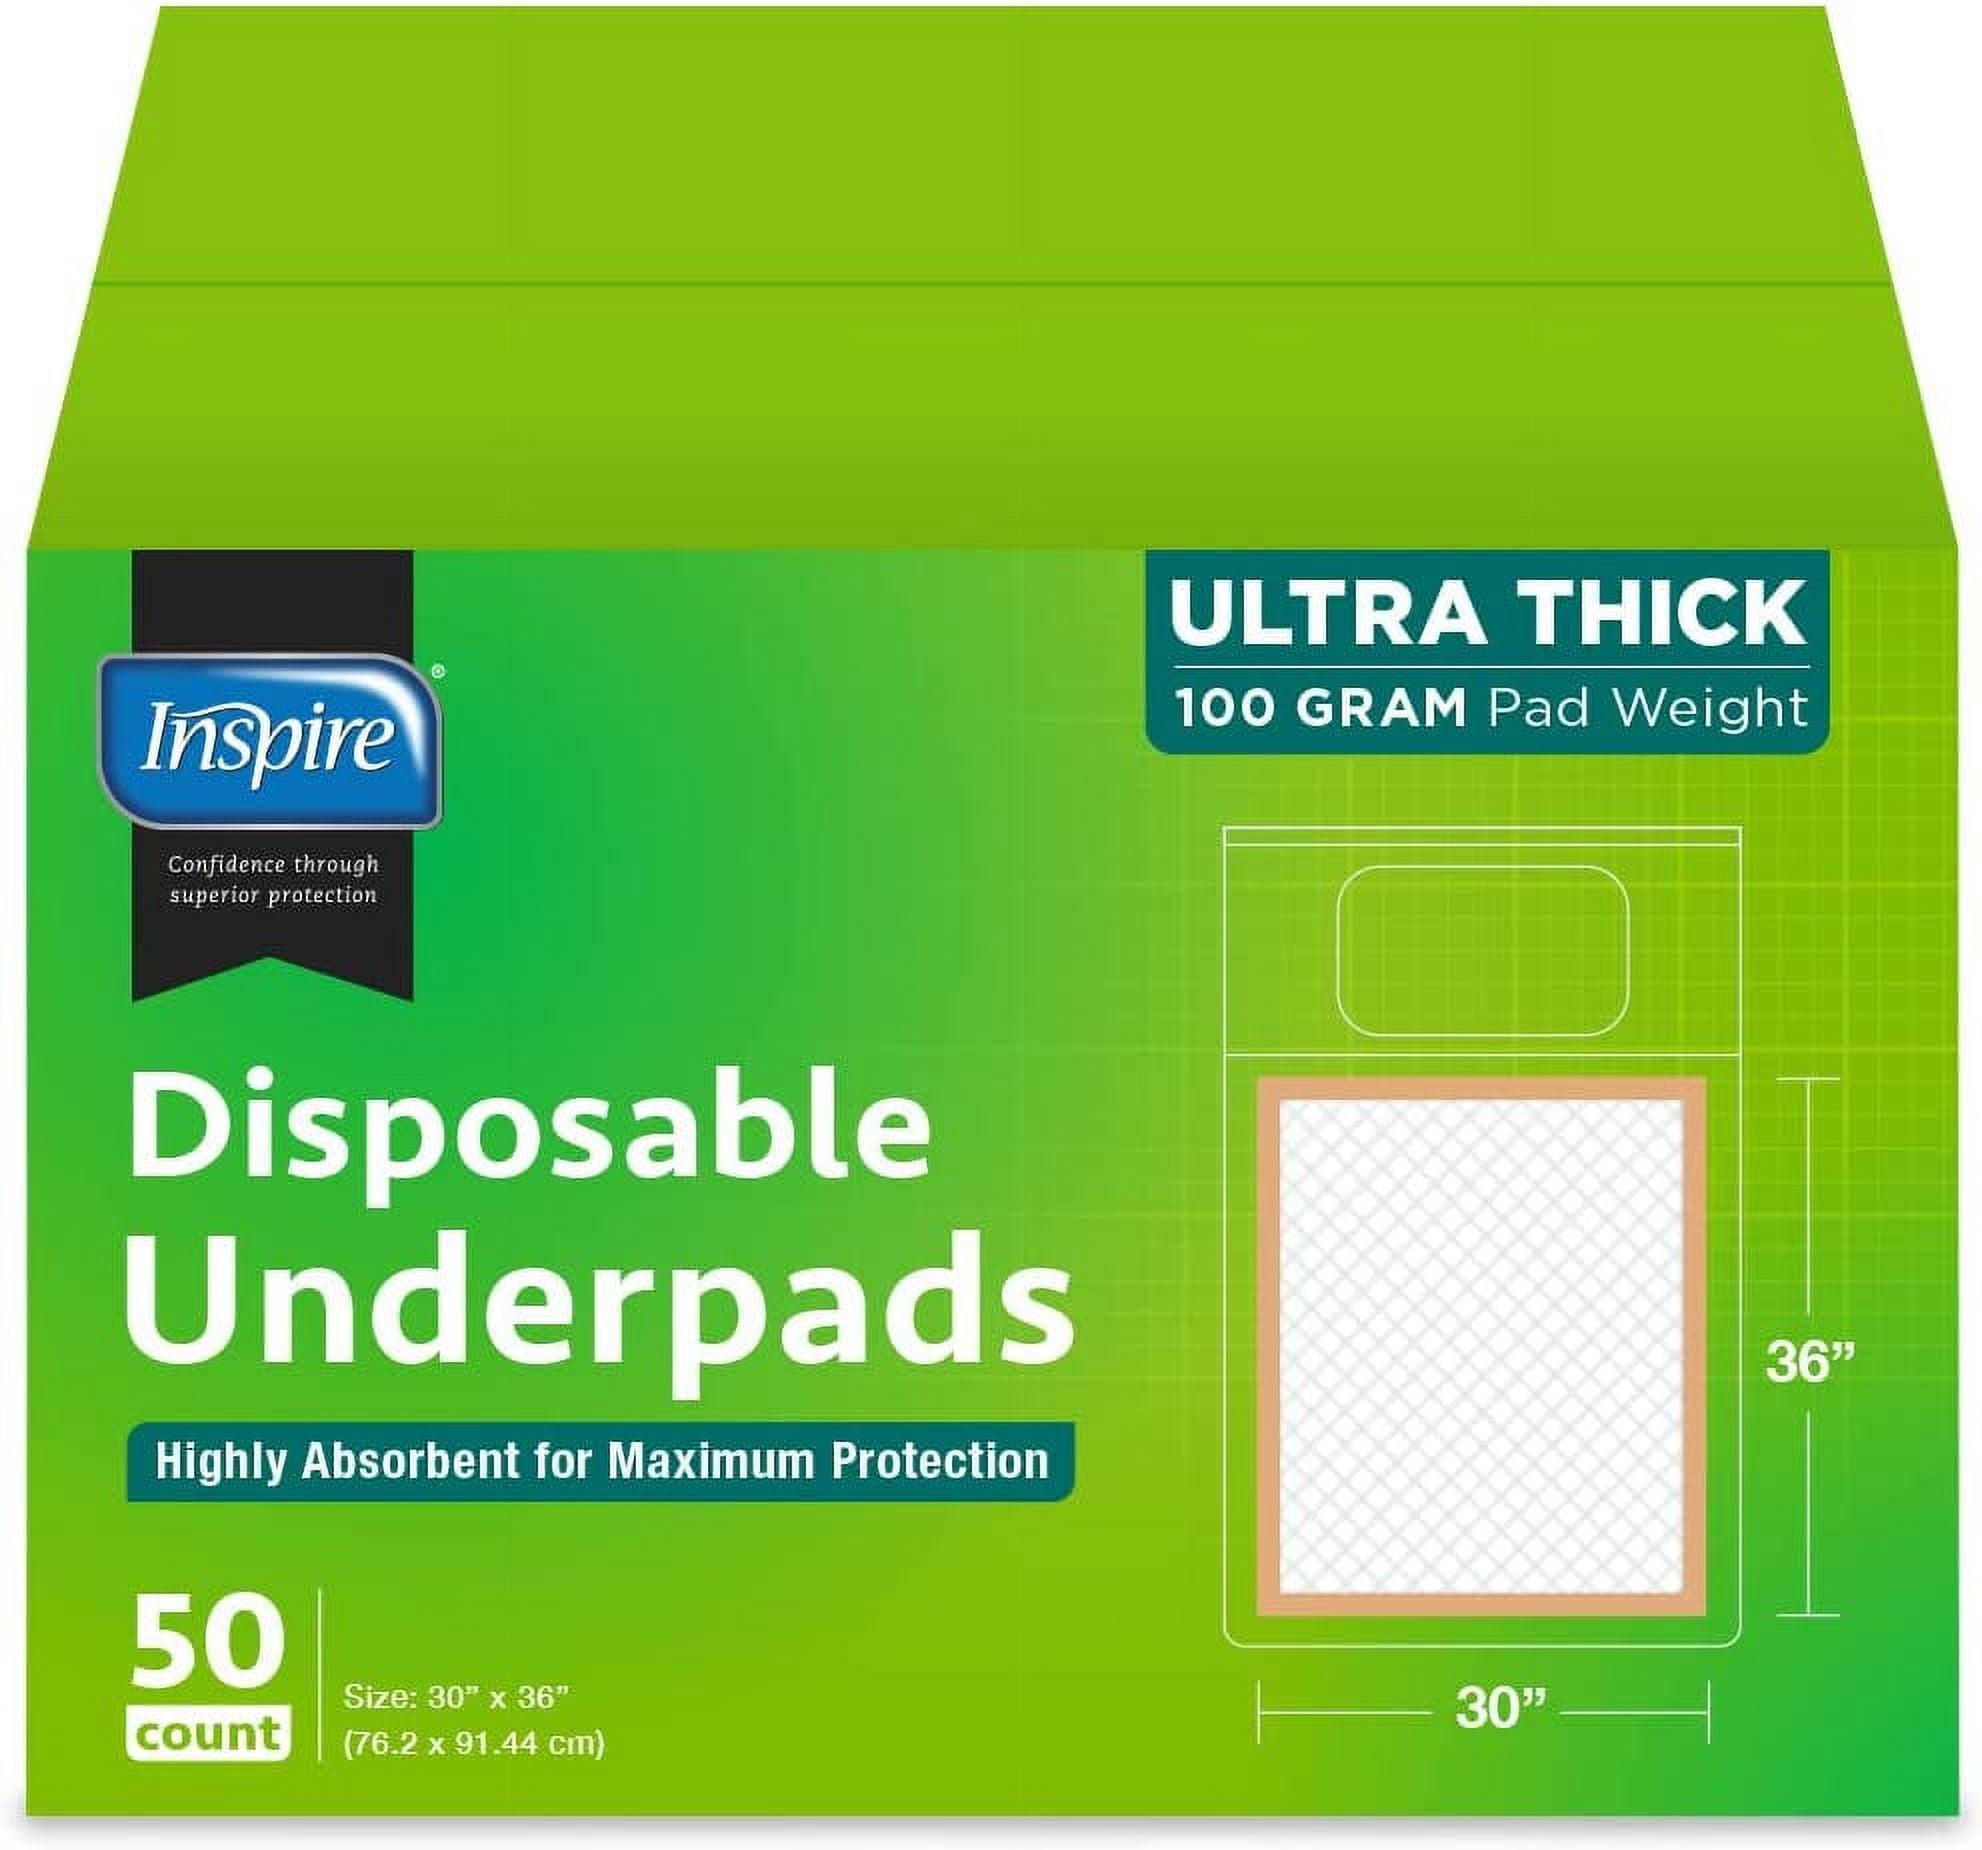 Wave Disposable Underpads 23'' X 36'' (30 Count) Incontinence Pads 68g Each  Chux Bed Covers Puppy Training, Super Absorbent Protection for Kids Adults  Elderly